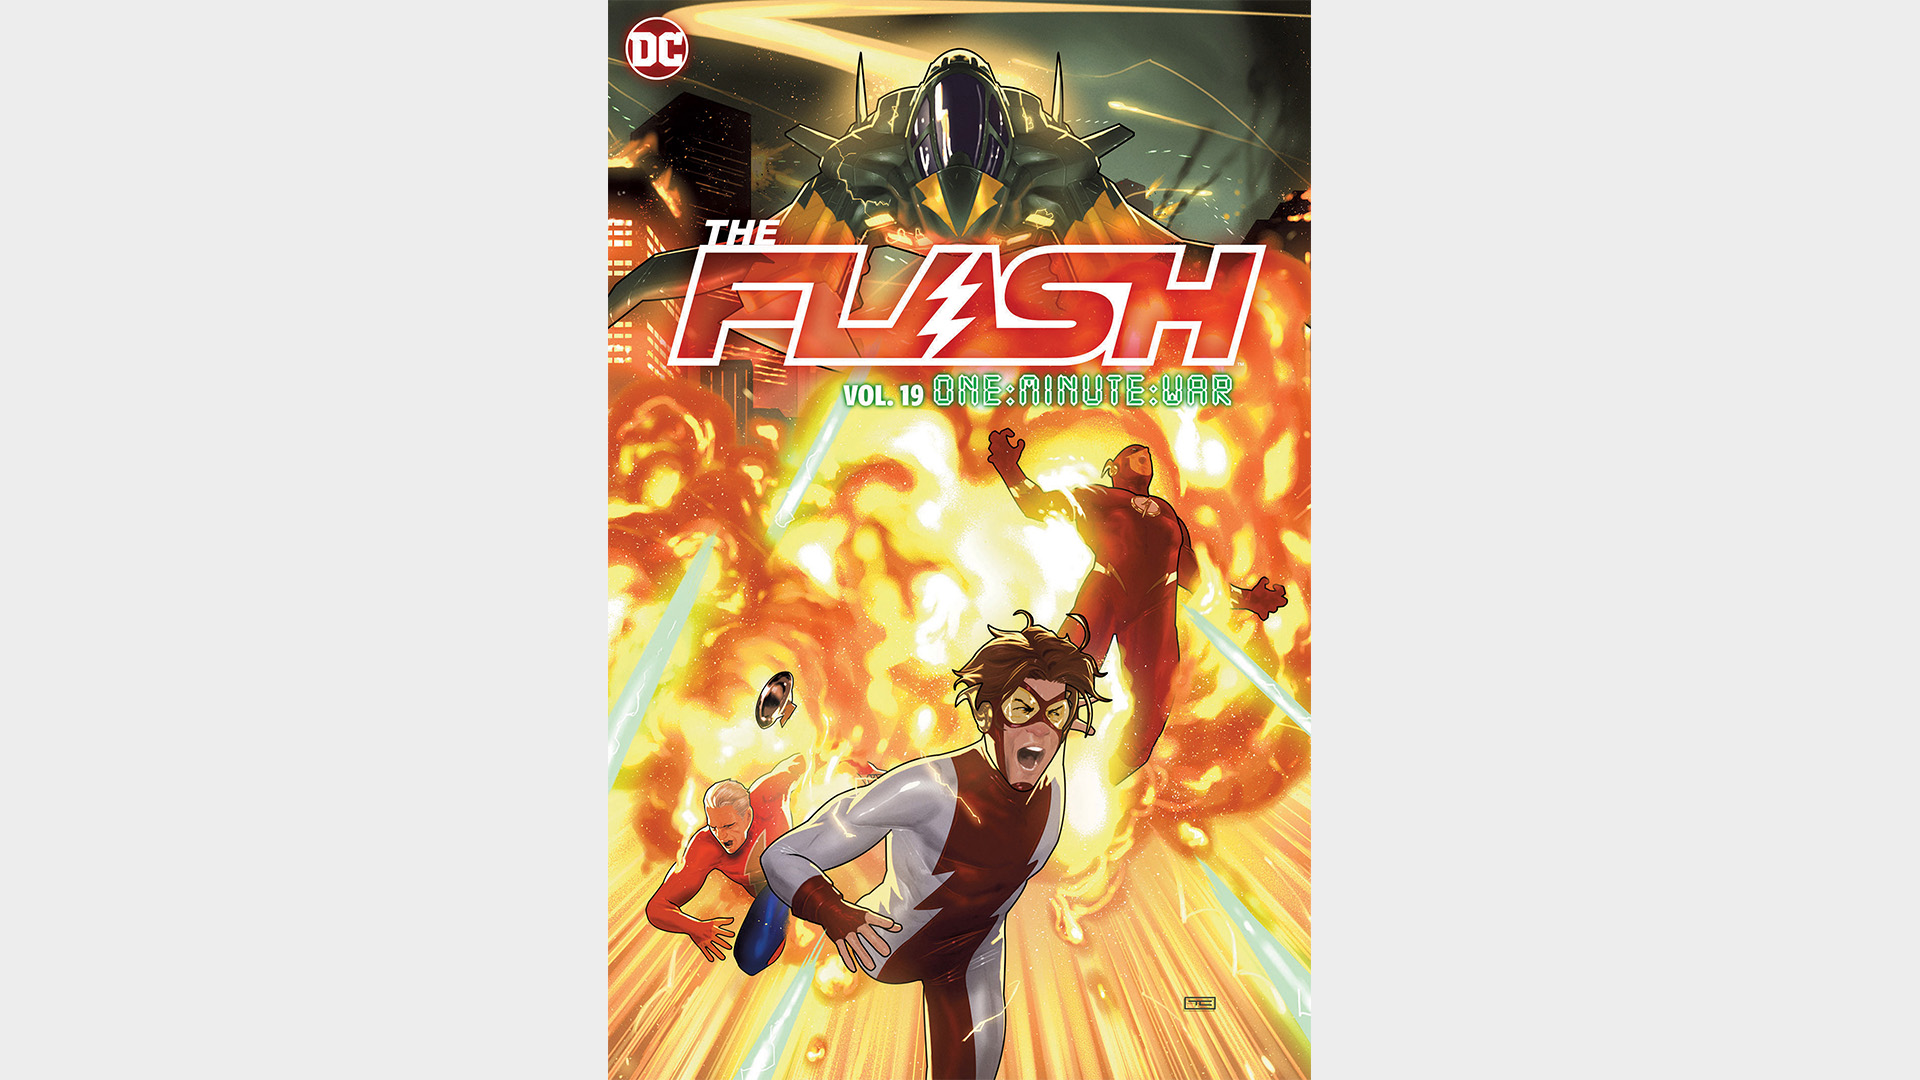 THE FLASH VOL. 19: THE ONE-MINUTE WAR